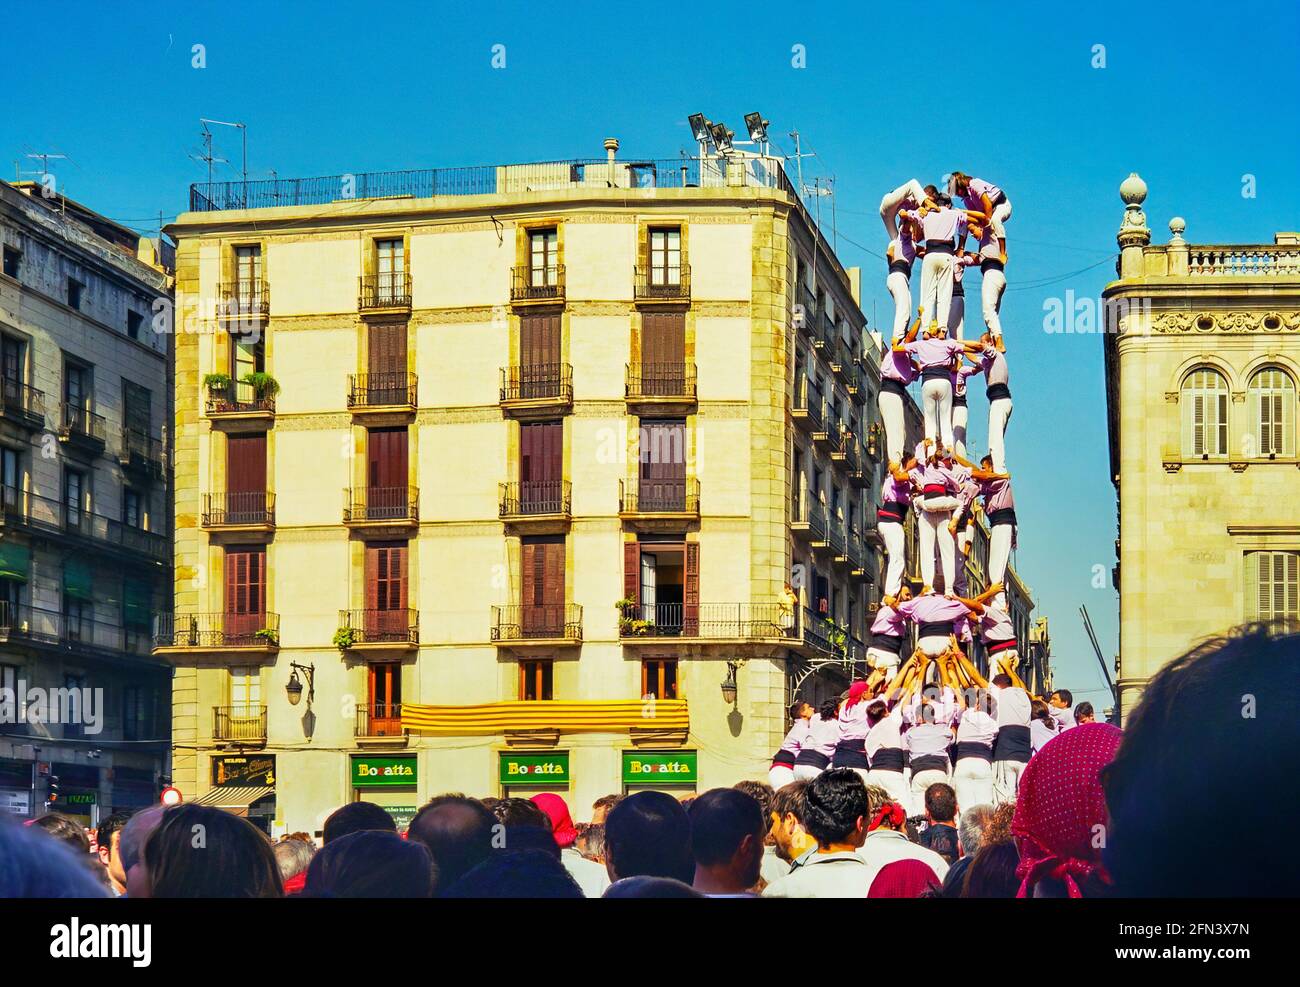 Barcelona, Spain - September 23, 1999: Local people building human towers (Castellers), part of the traditional La Merce Festival, in Barcelona, Spain Stock Photo